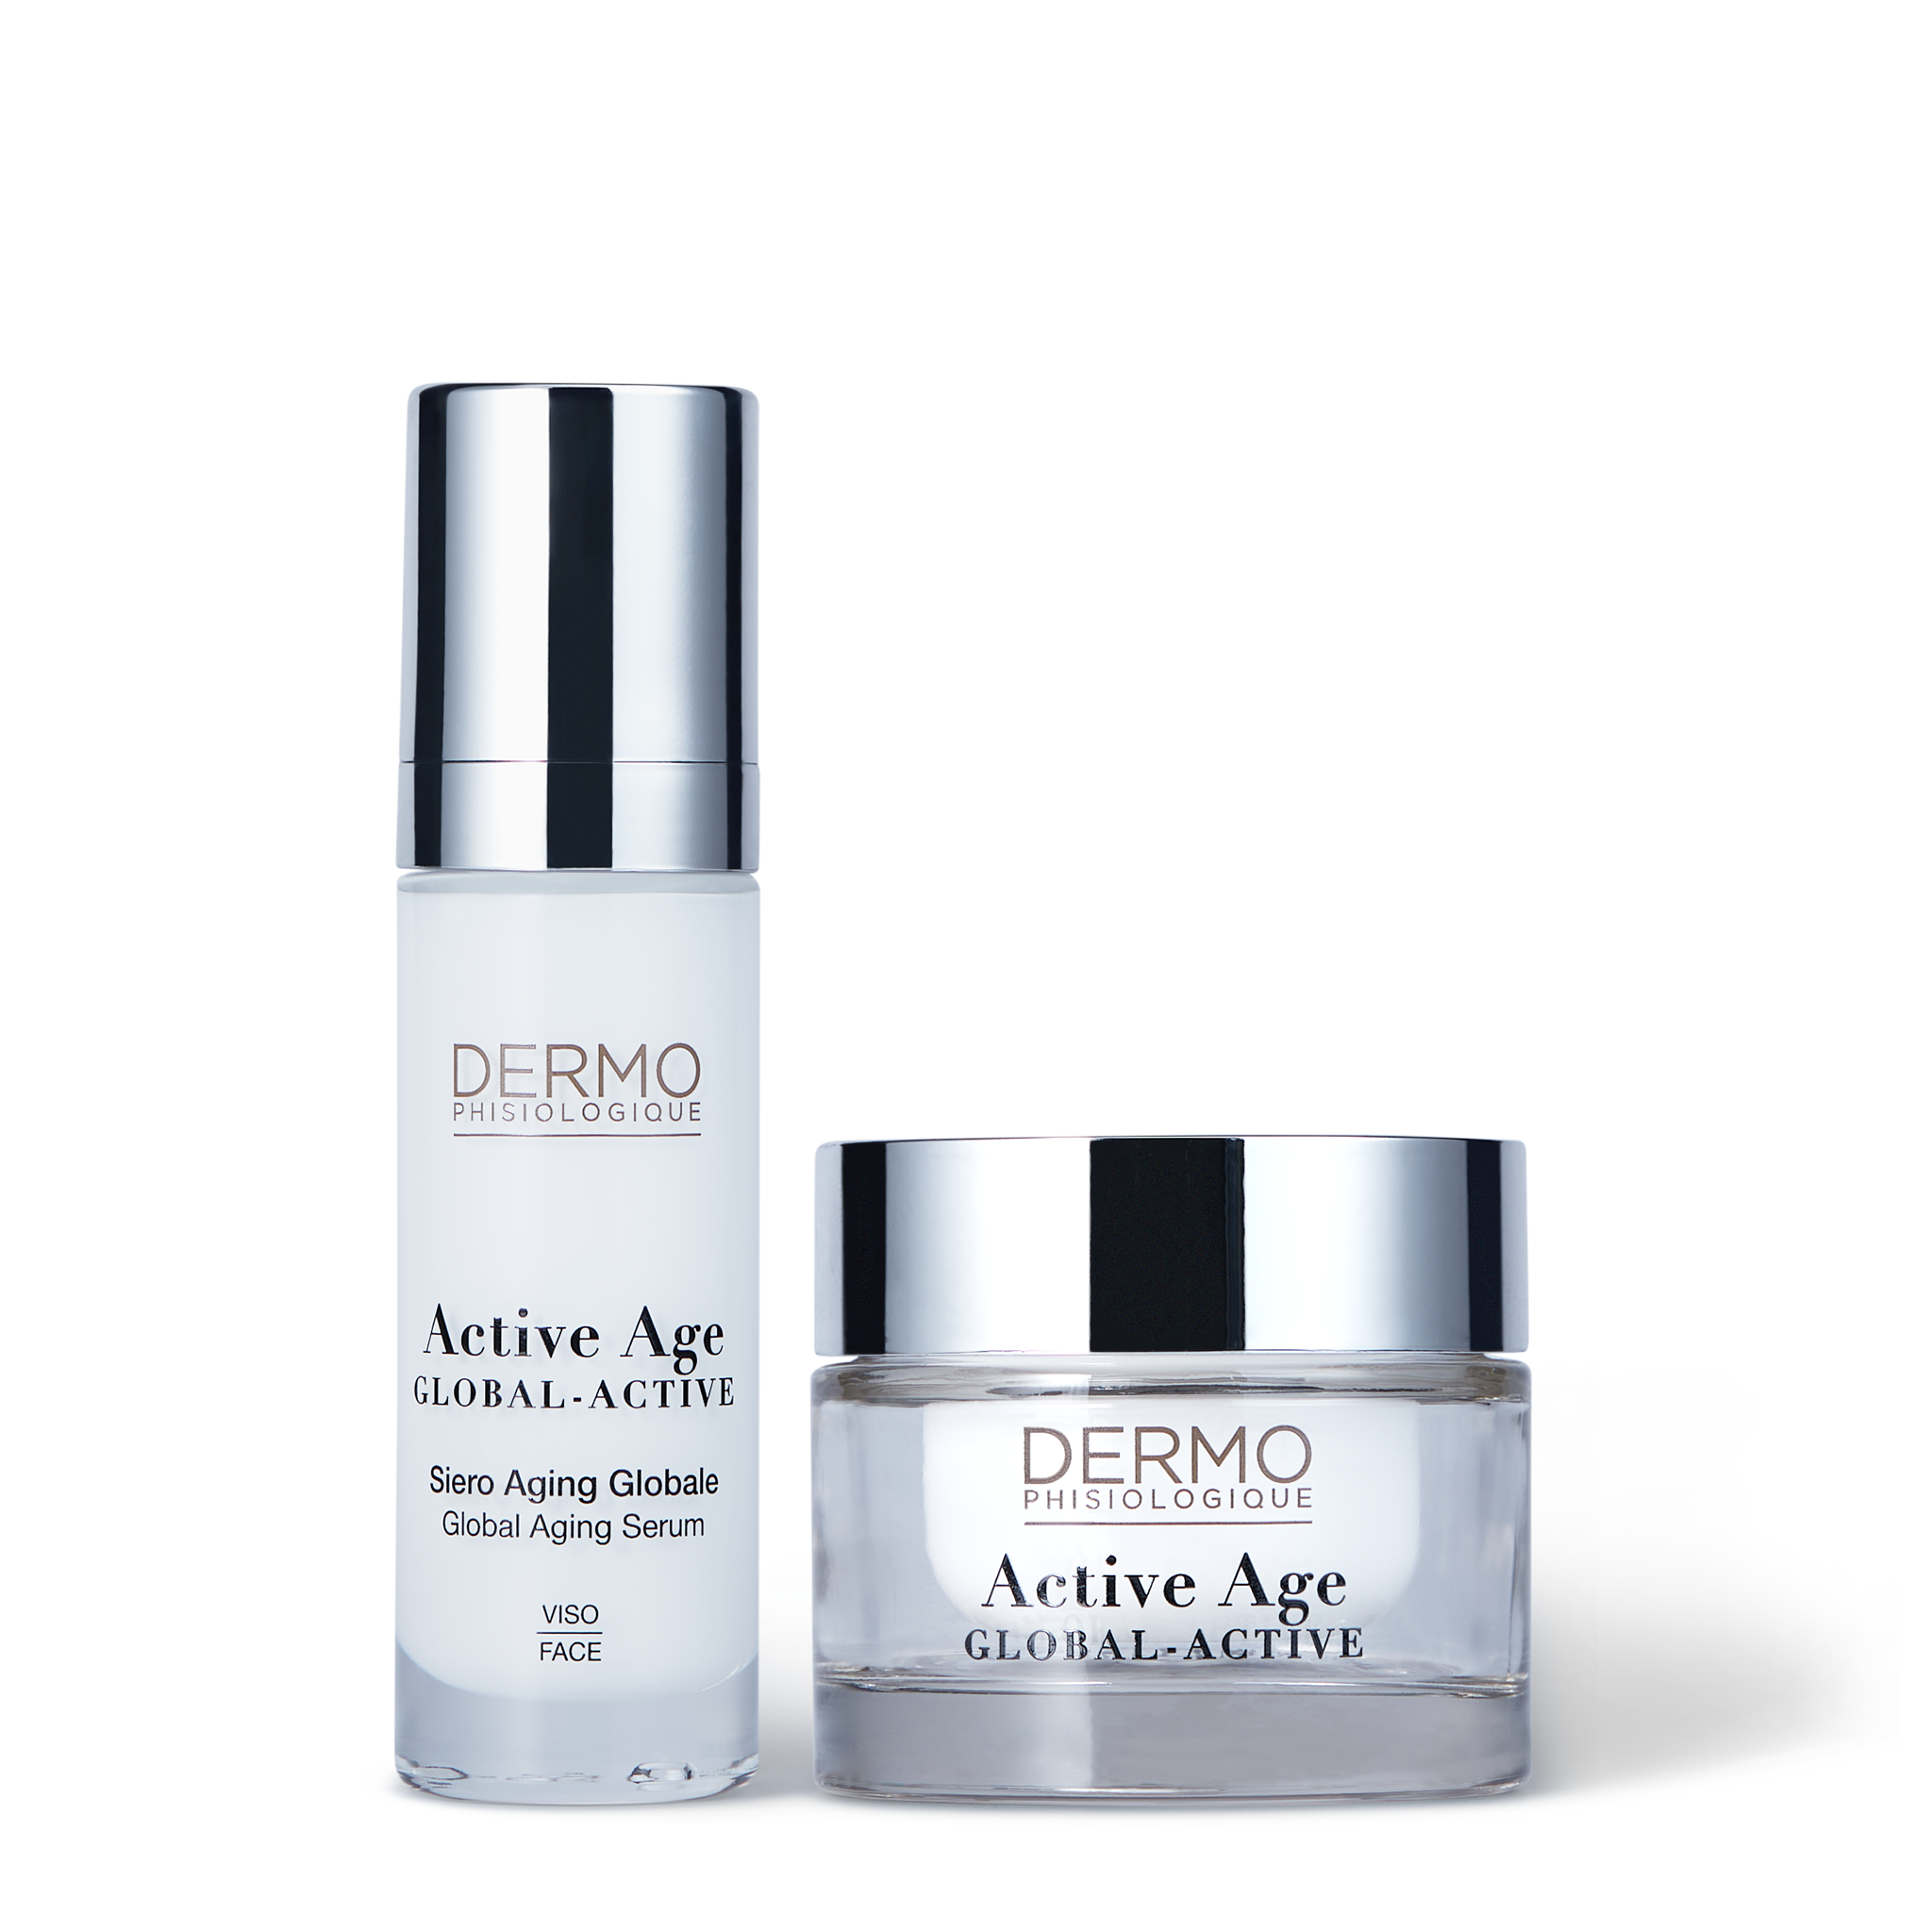 Active Age Global Active Anti-aging Cream and Serum